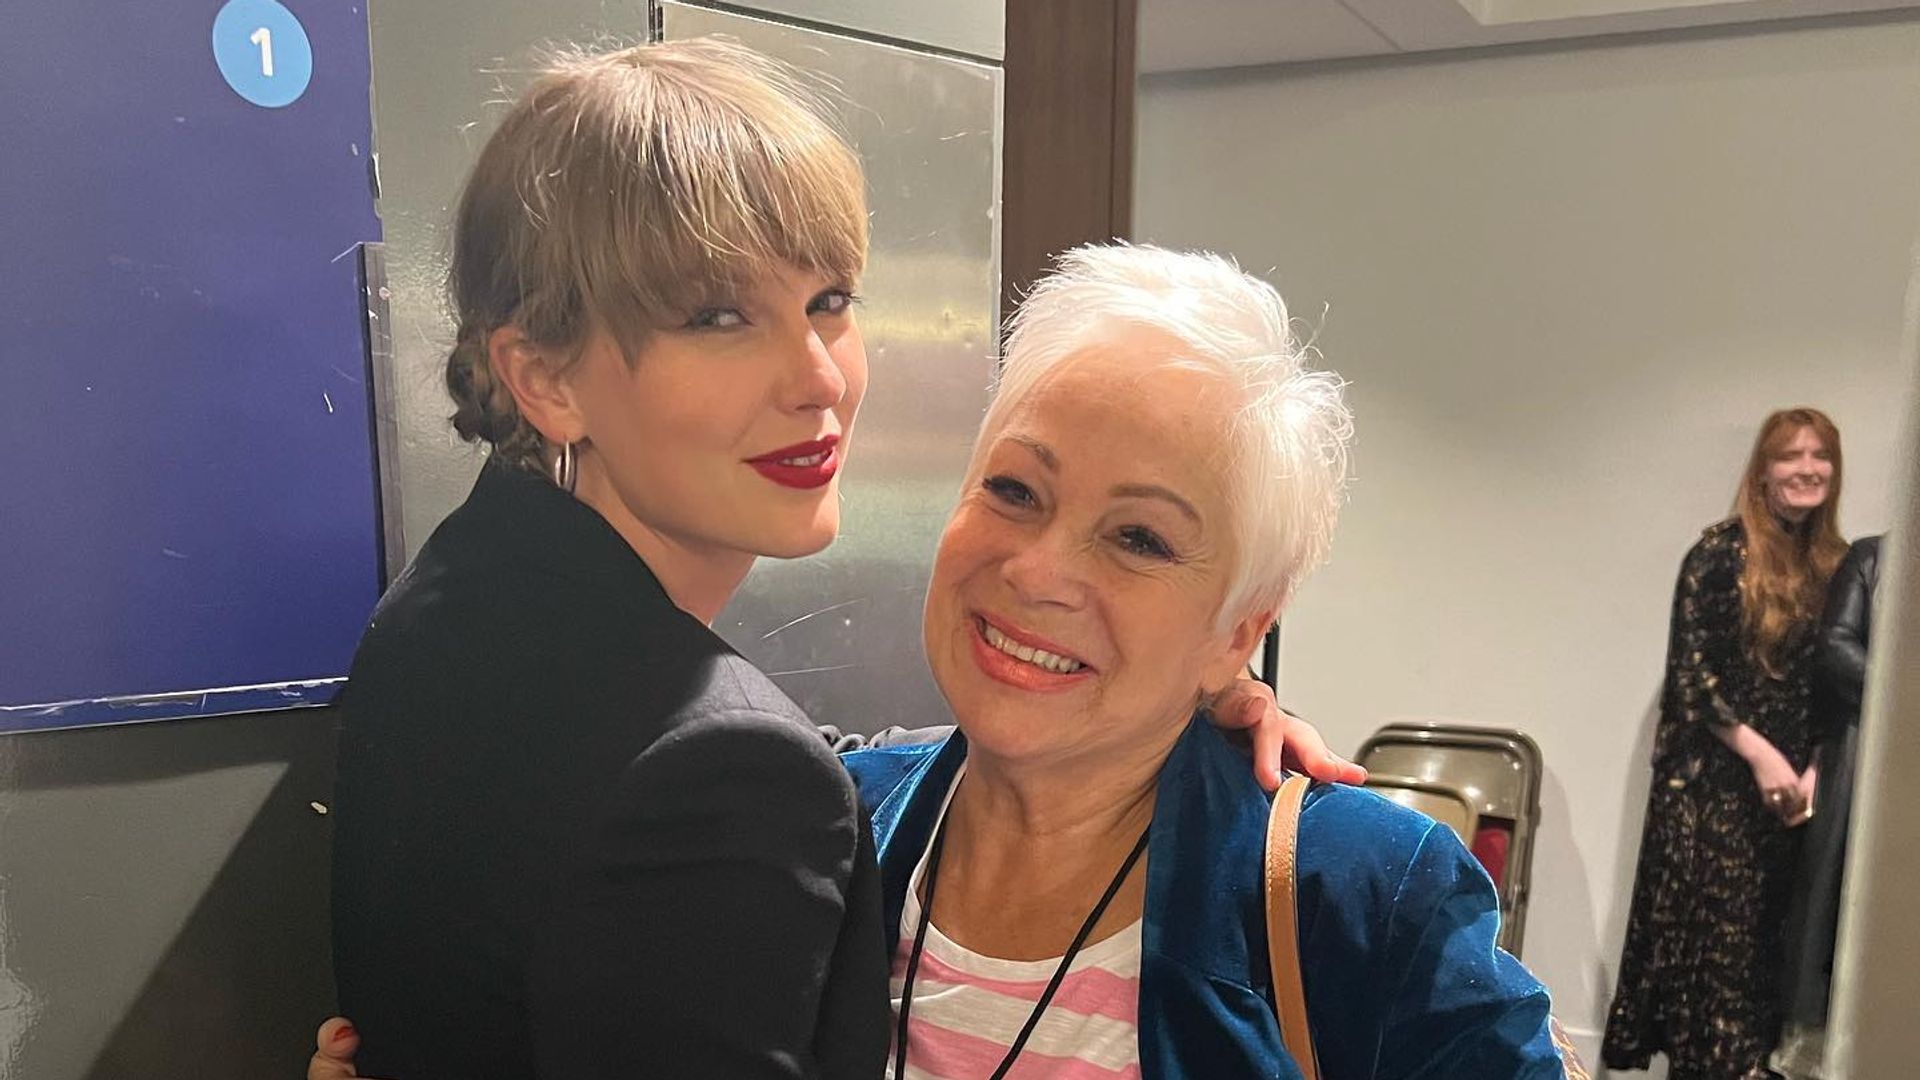 Matty Healy's mother breaks silence on Taylor Swift's songs about her son 